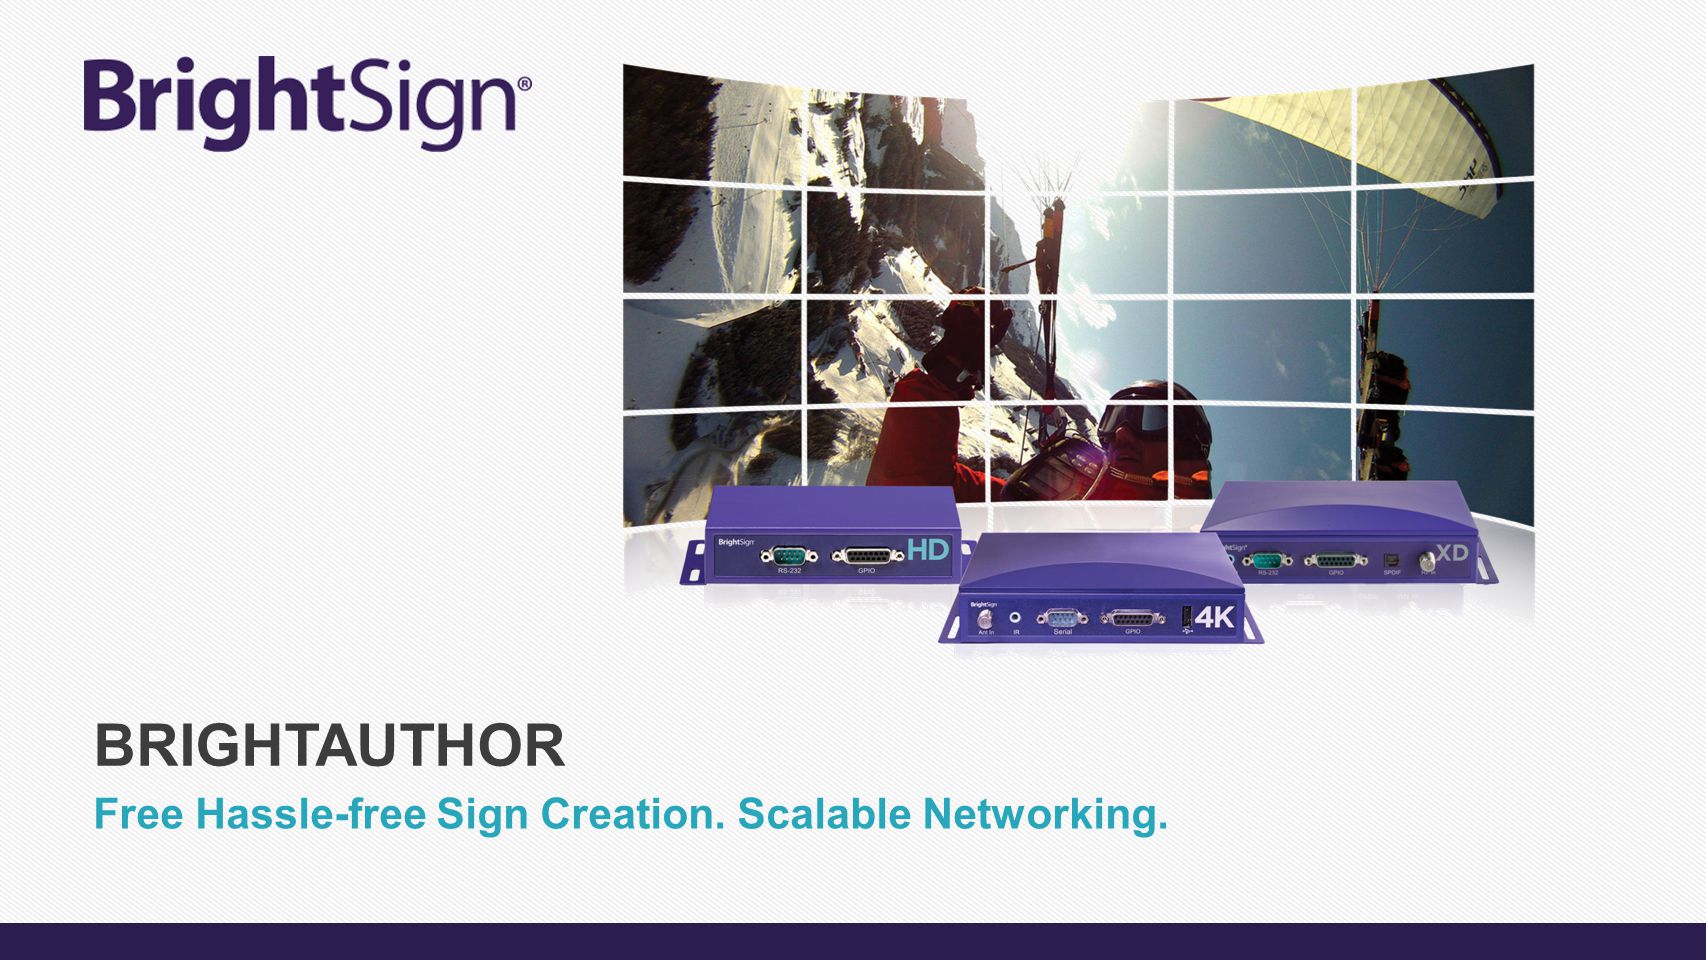 Free Hassle-free Sign Creation. Scalable Networking.